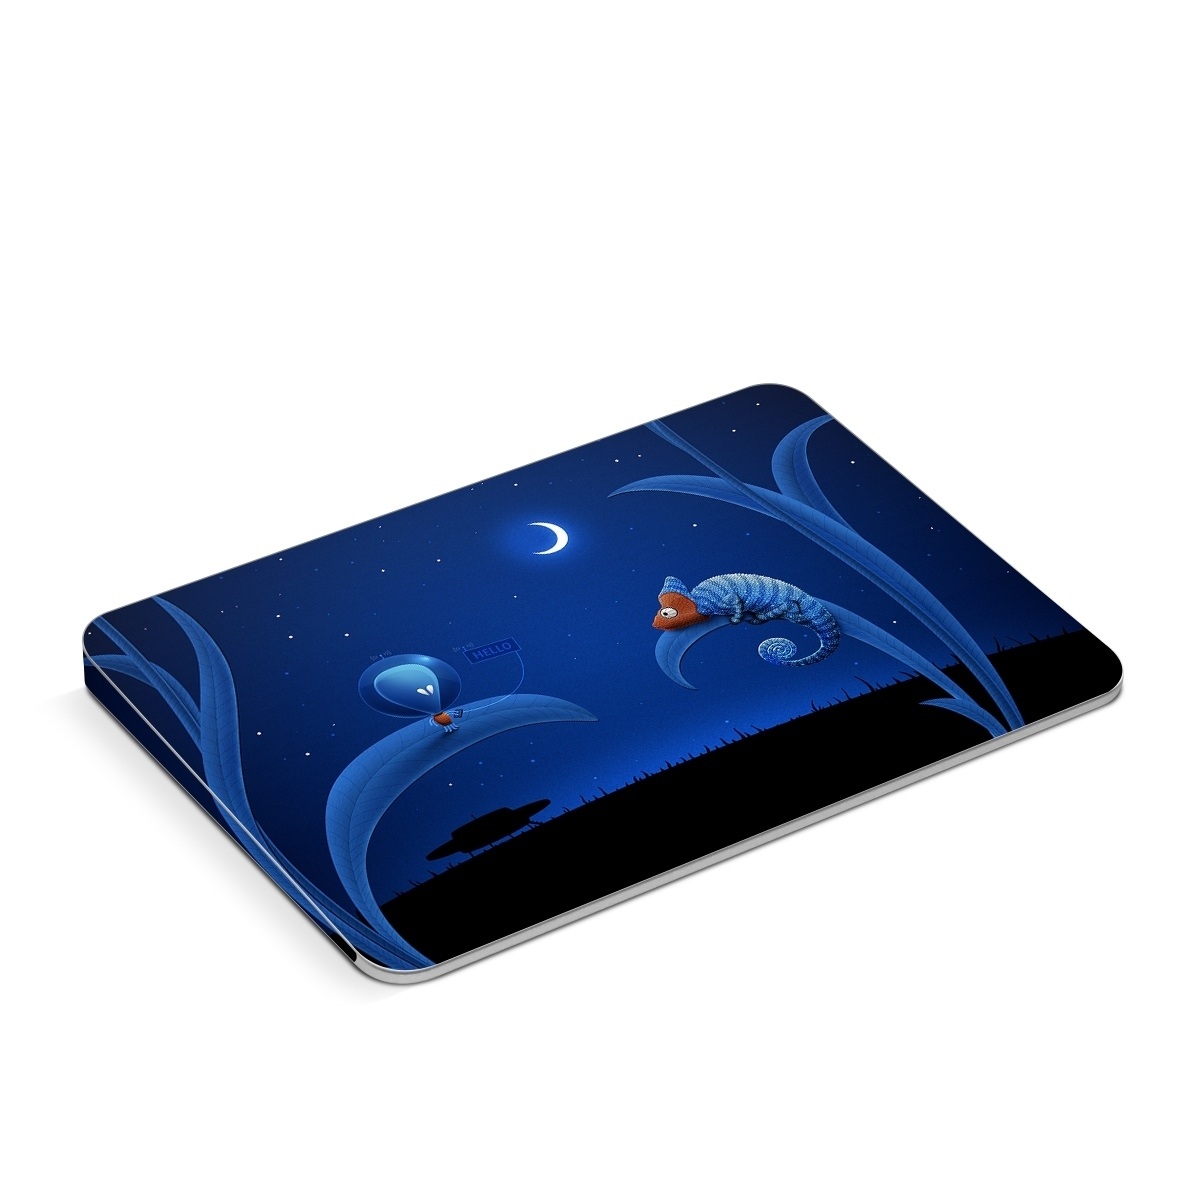 Apple Magic Trackpad Skin design of Organism, Astronomical object, Space, Illustration, Night, Graphics, with black, blue, orange colors